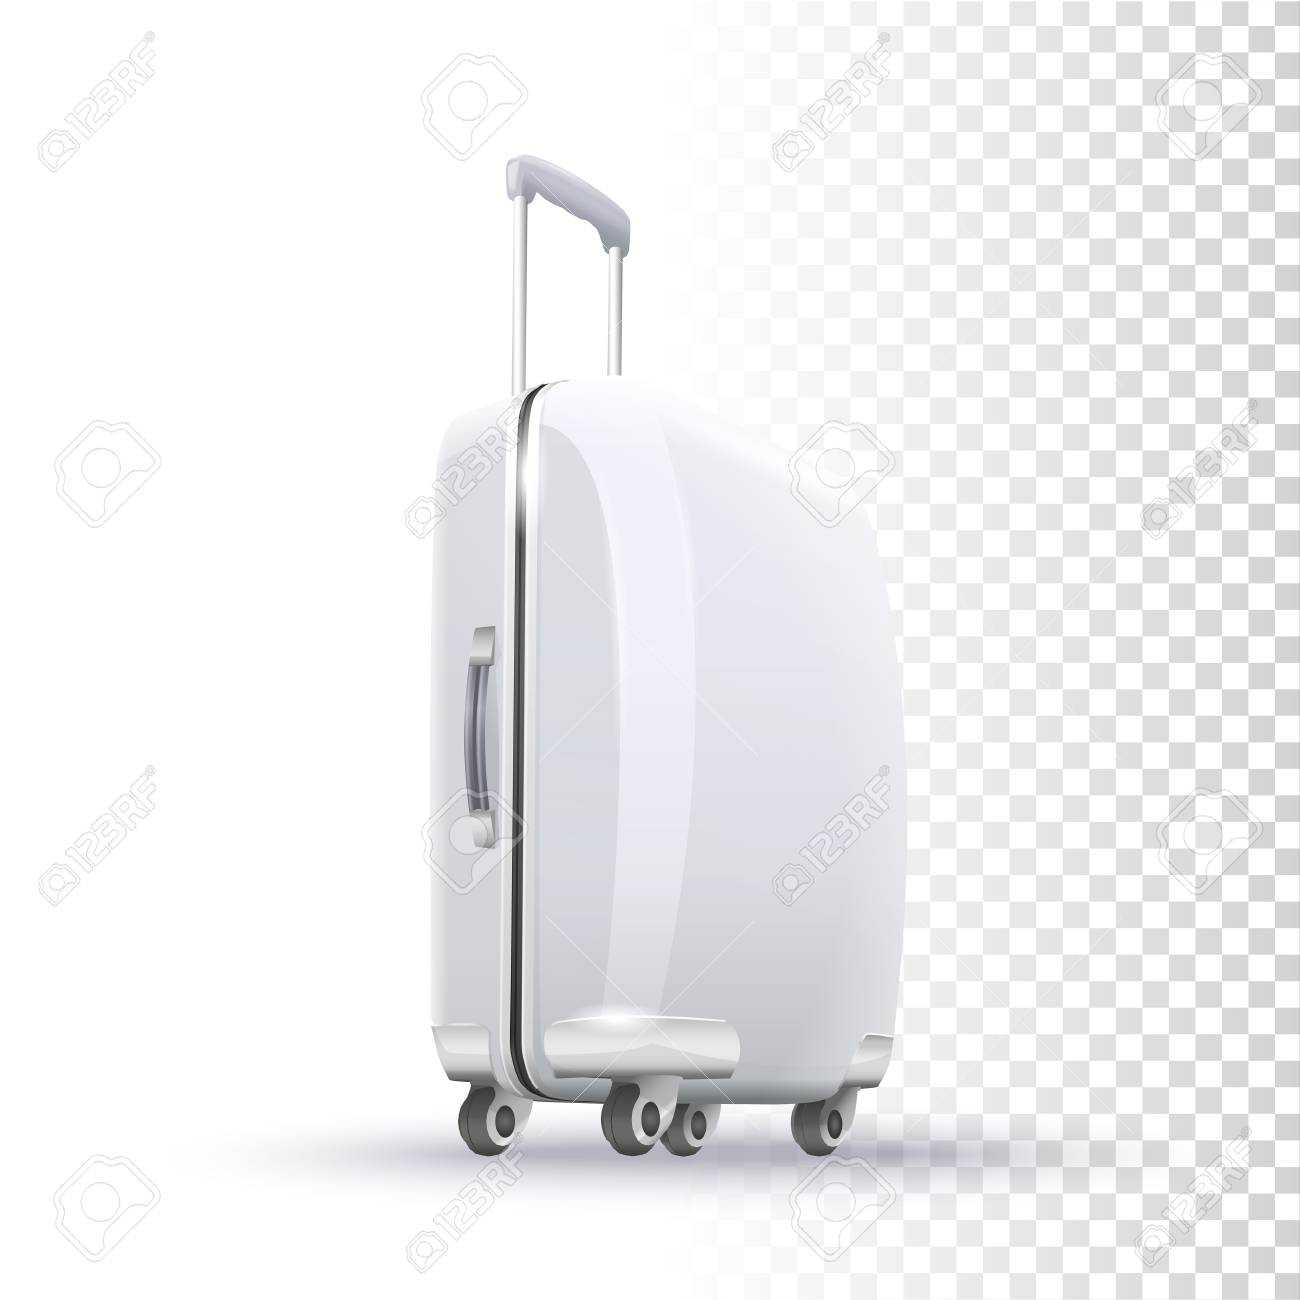 Vector Photo Realistic White Blank Suitcase Layout On Transparent.. Throughout Blank Suitcase Template